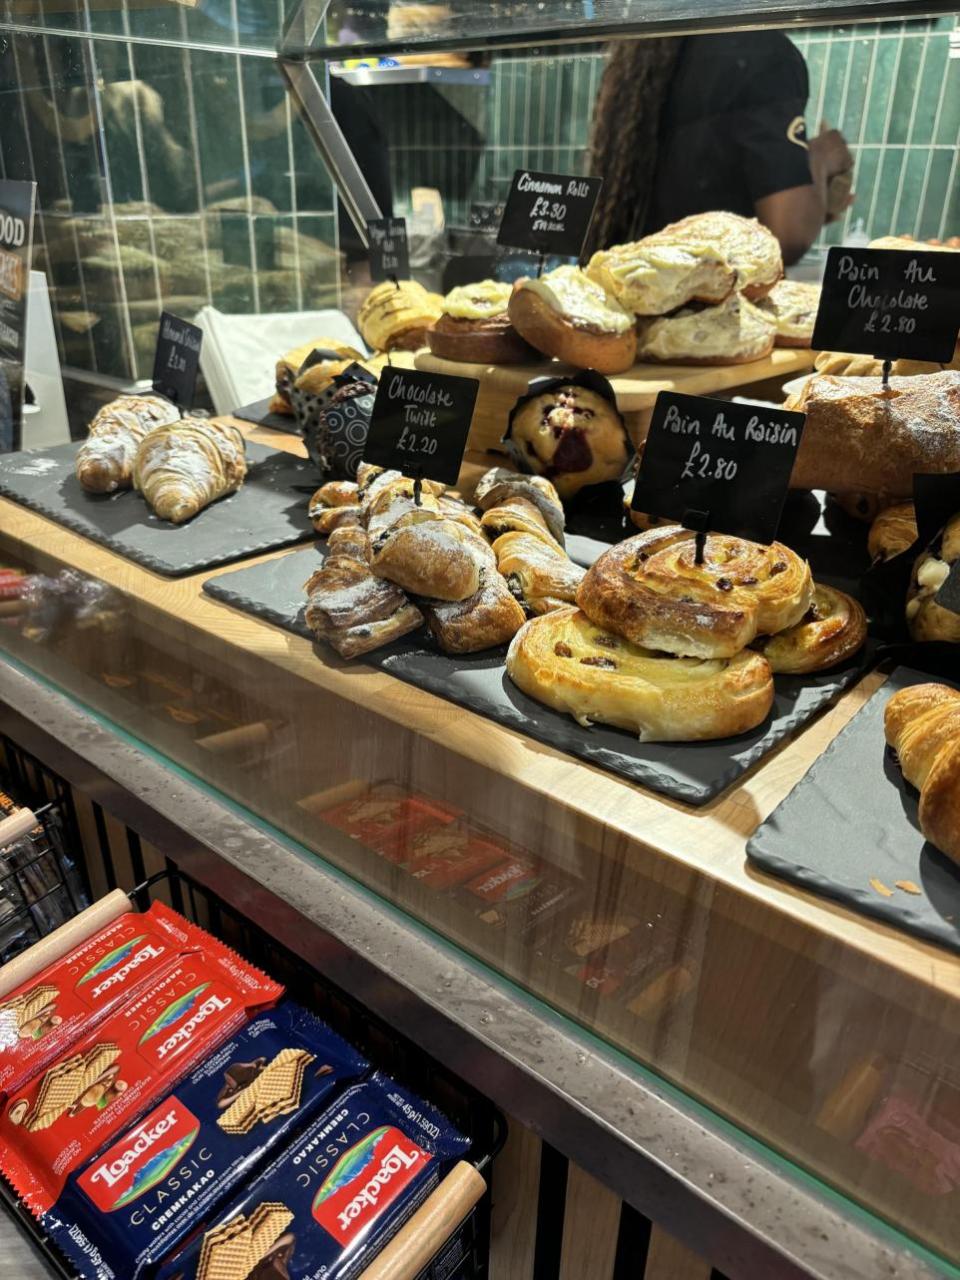 East Anglian Daily Times: Pastries in Esquires